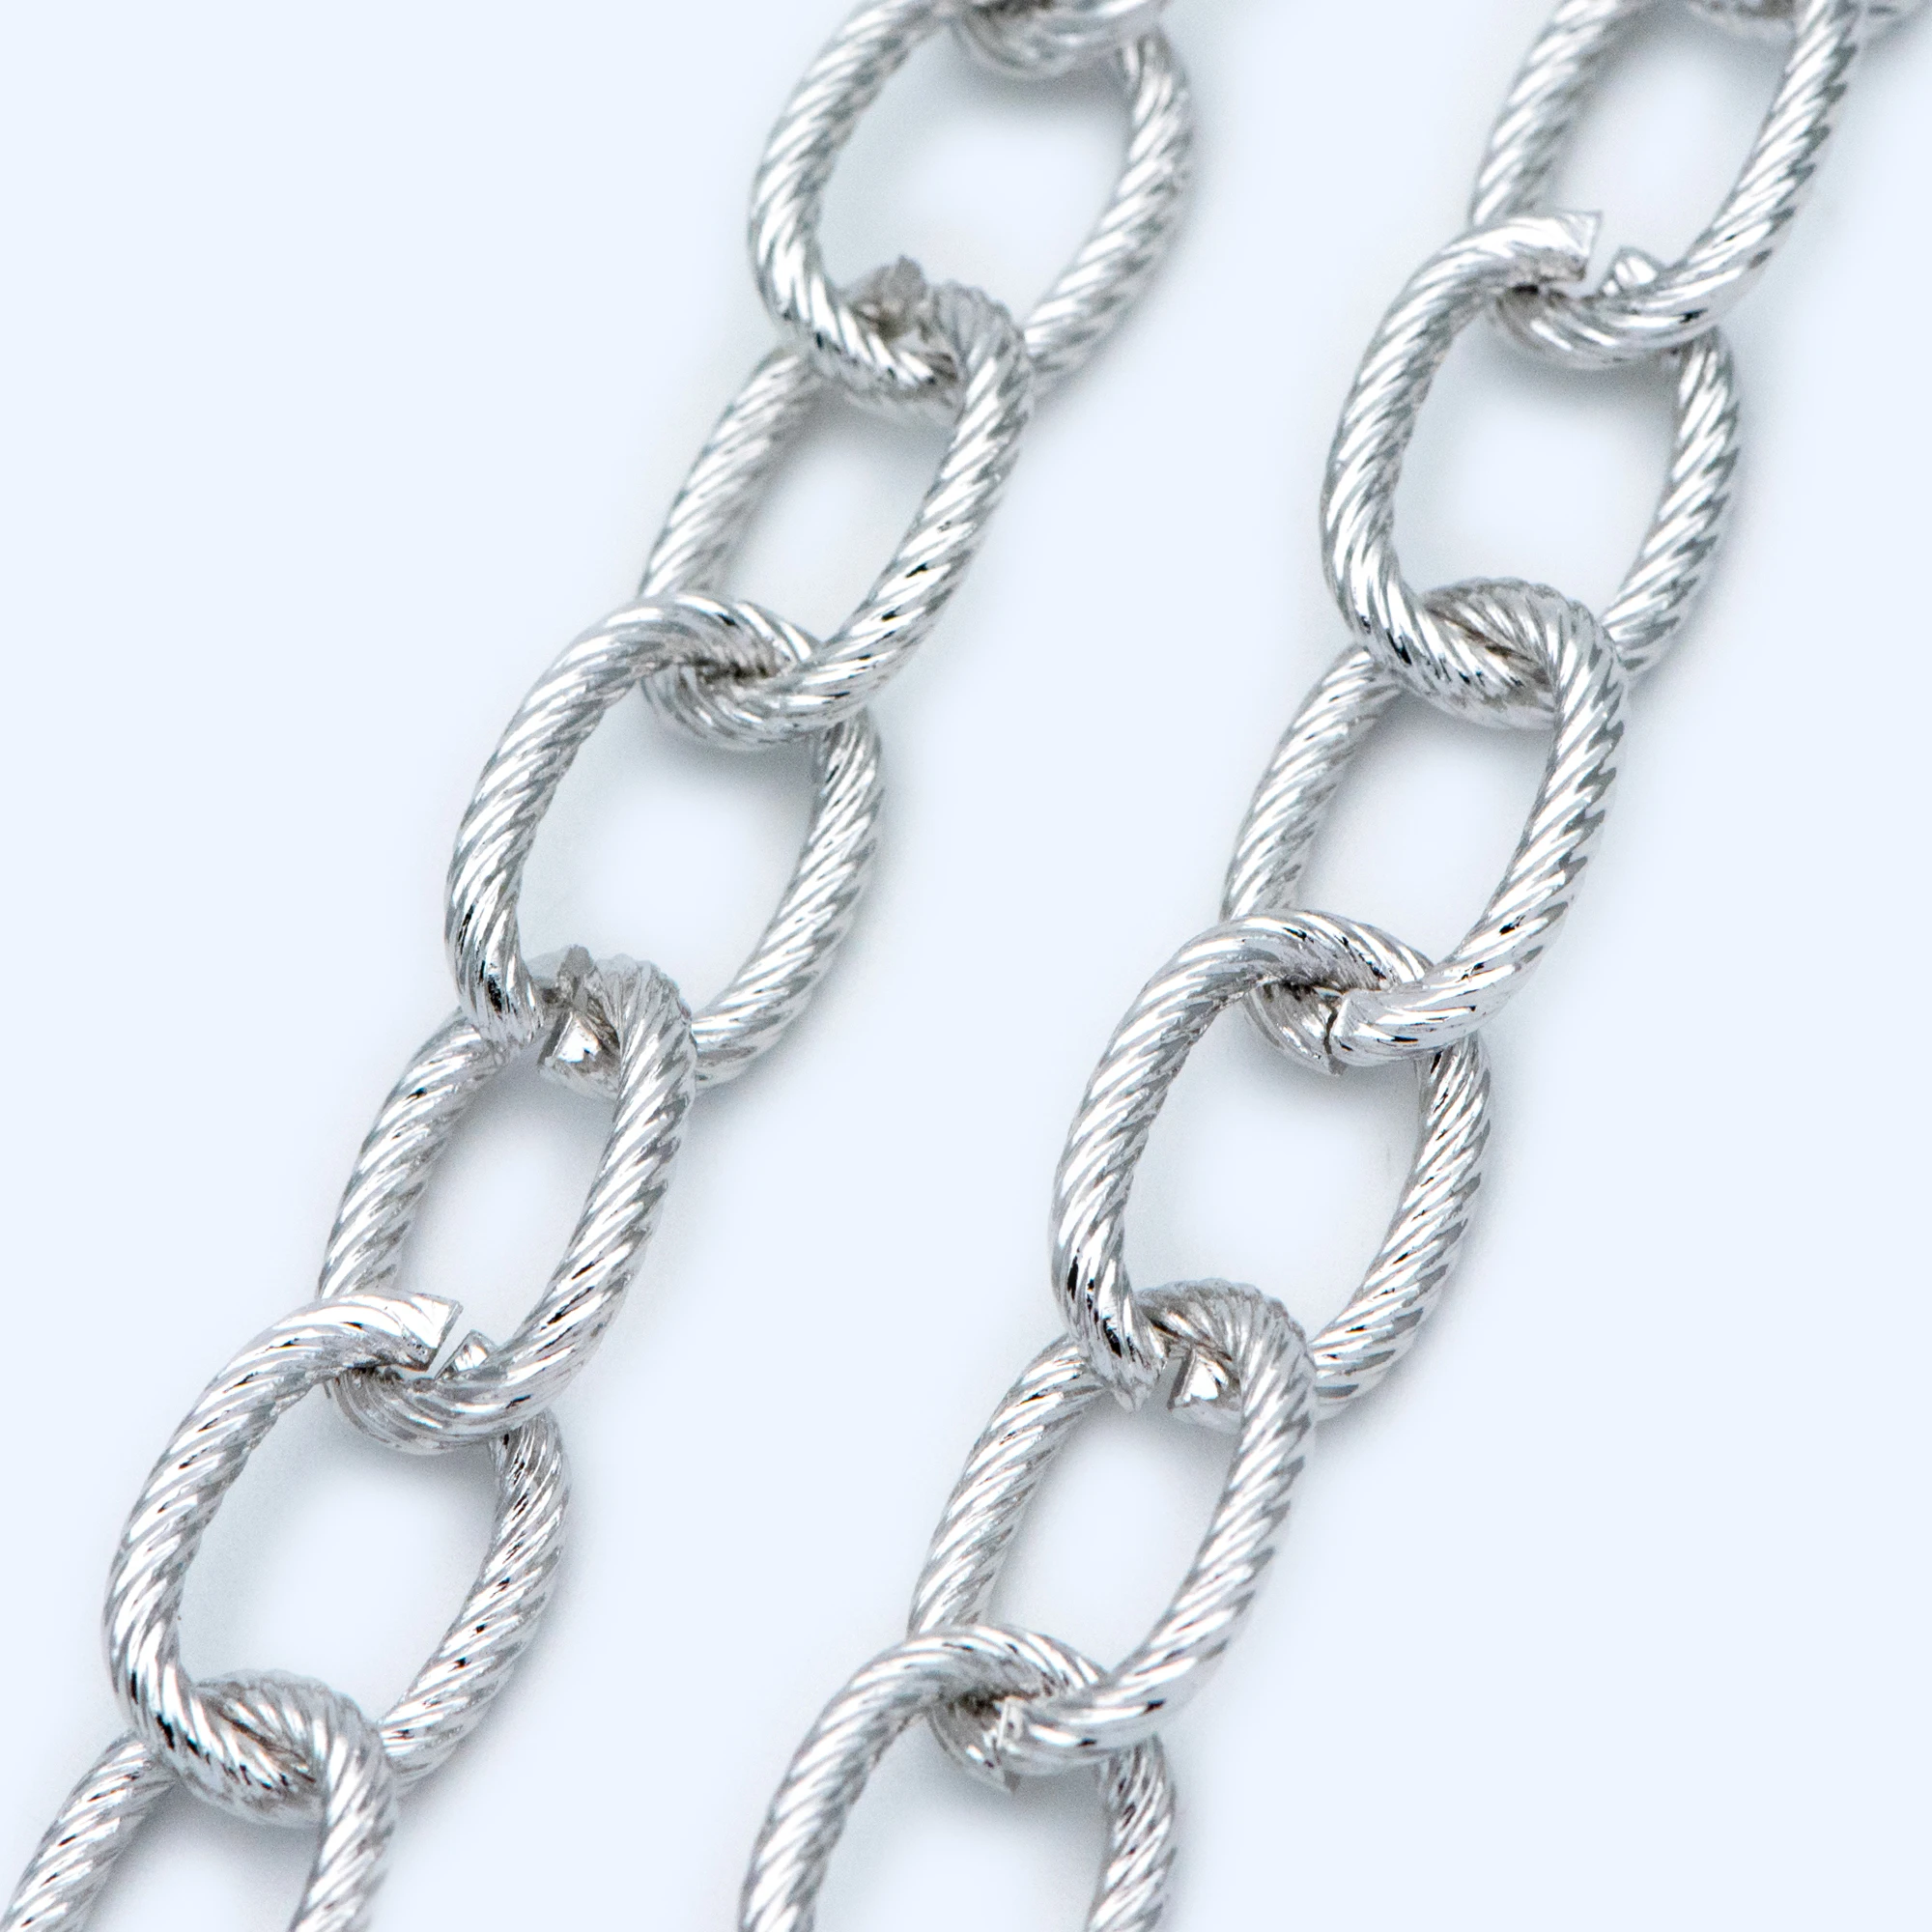 Silver Tone Chunky Cable Chains, Oval Link Size 10x15mm, White K Plated Iron, For Necklaces Bracelets DIY Jewelry Making